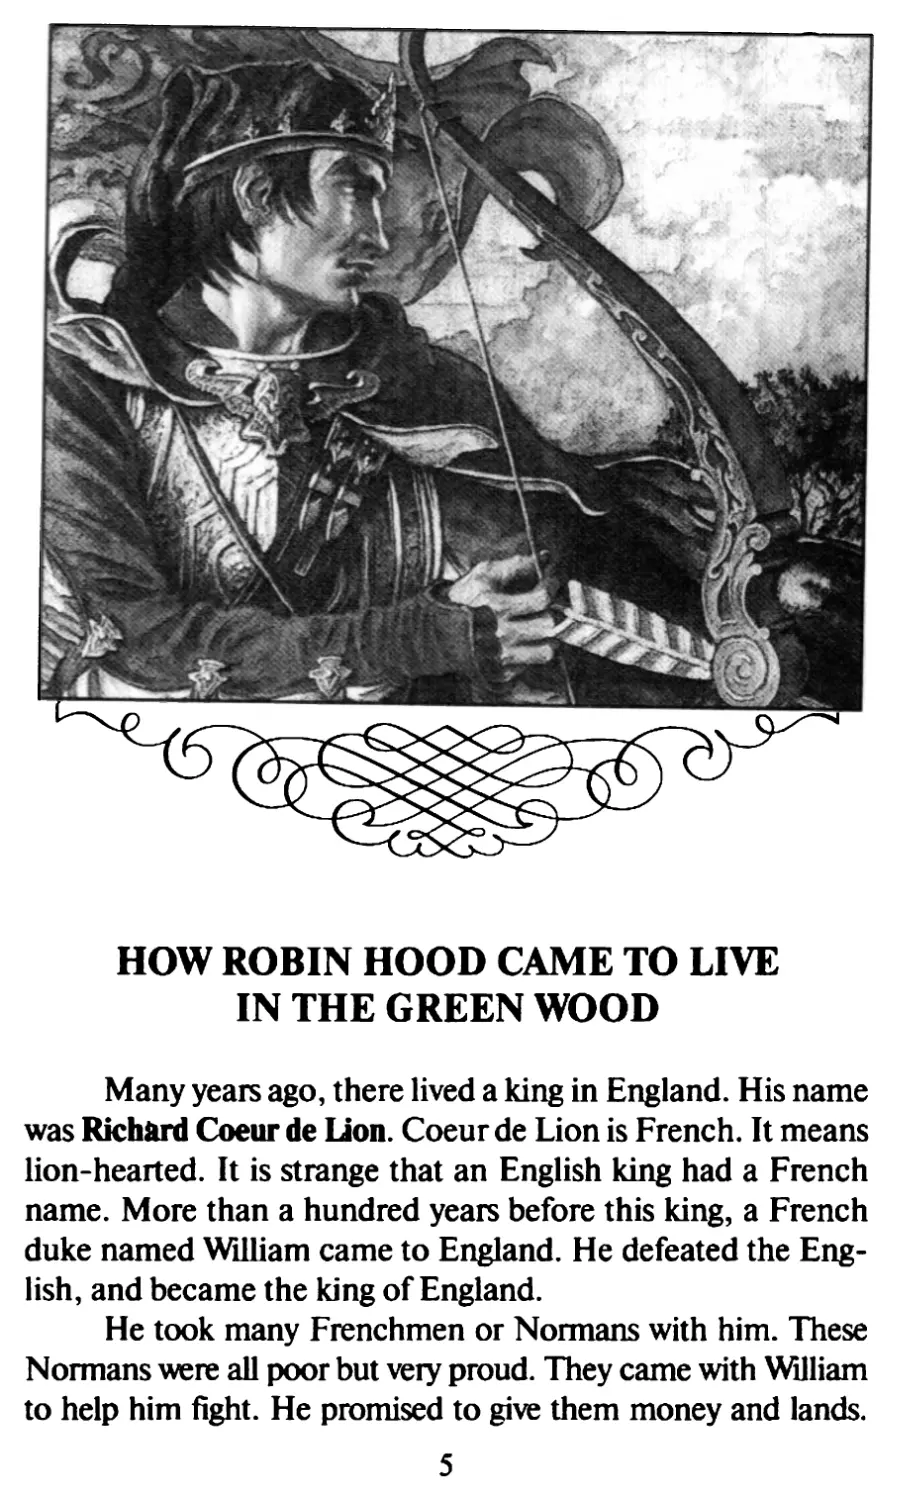 How Robin Hood Came to Live in the Green Wsod